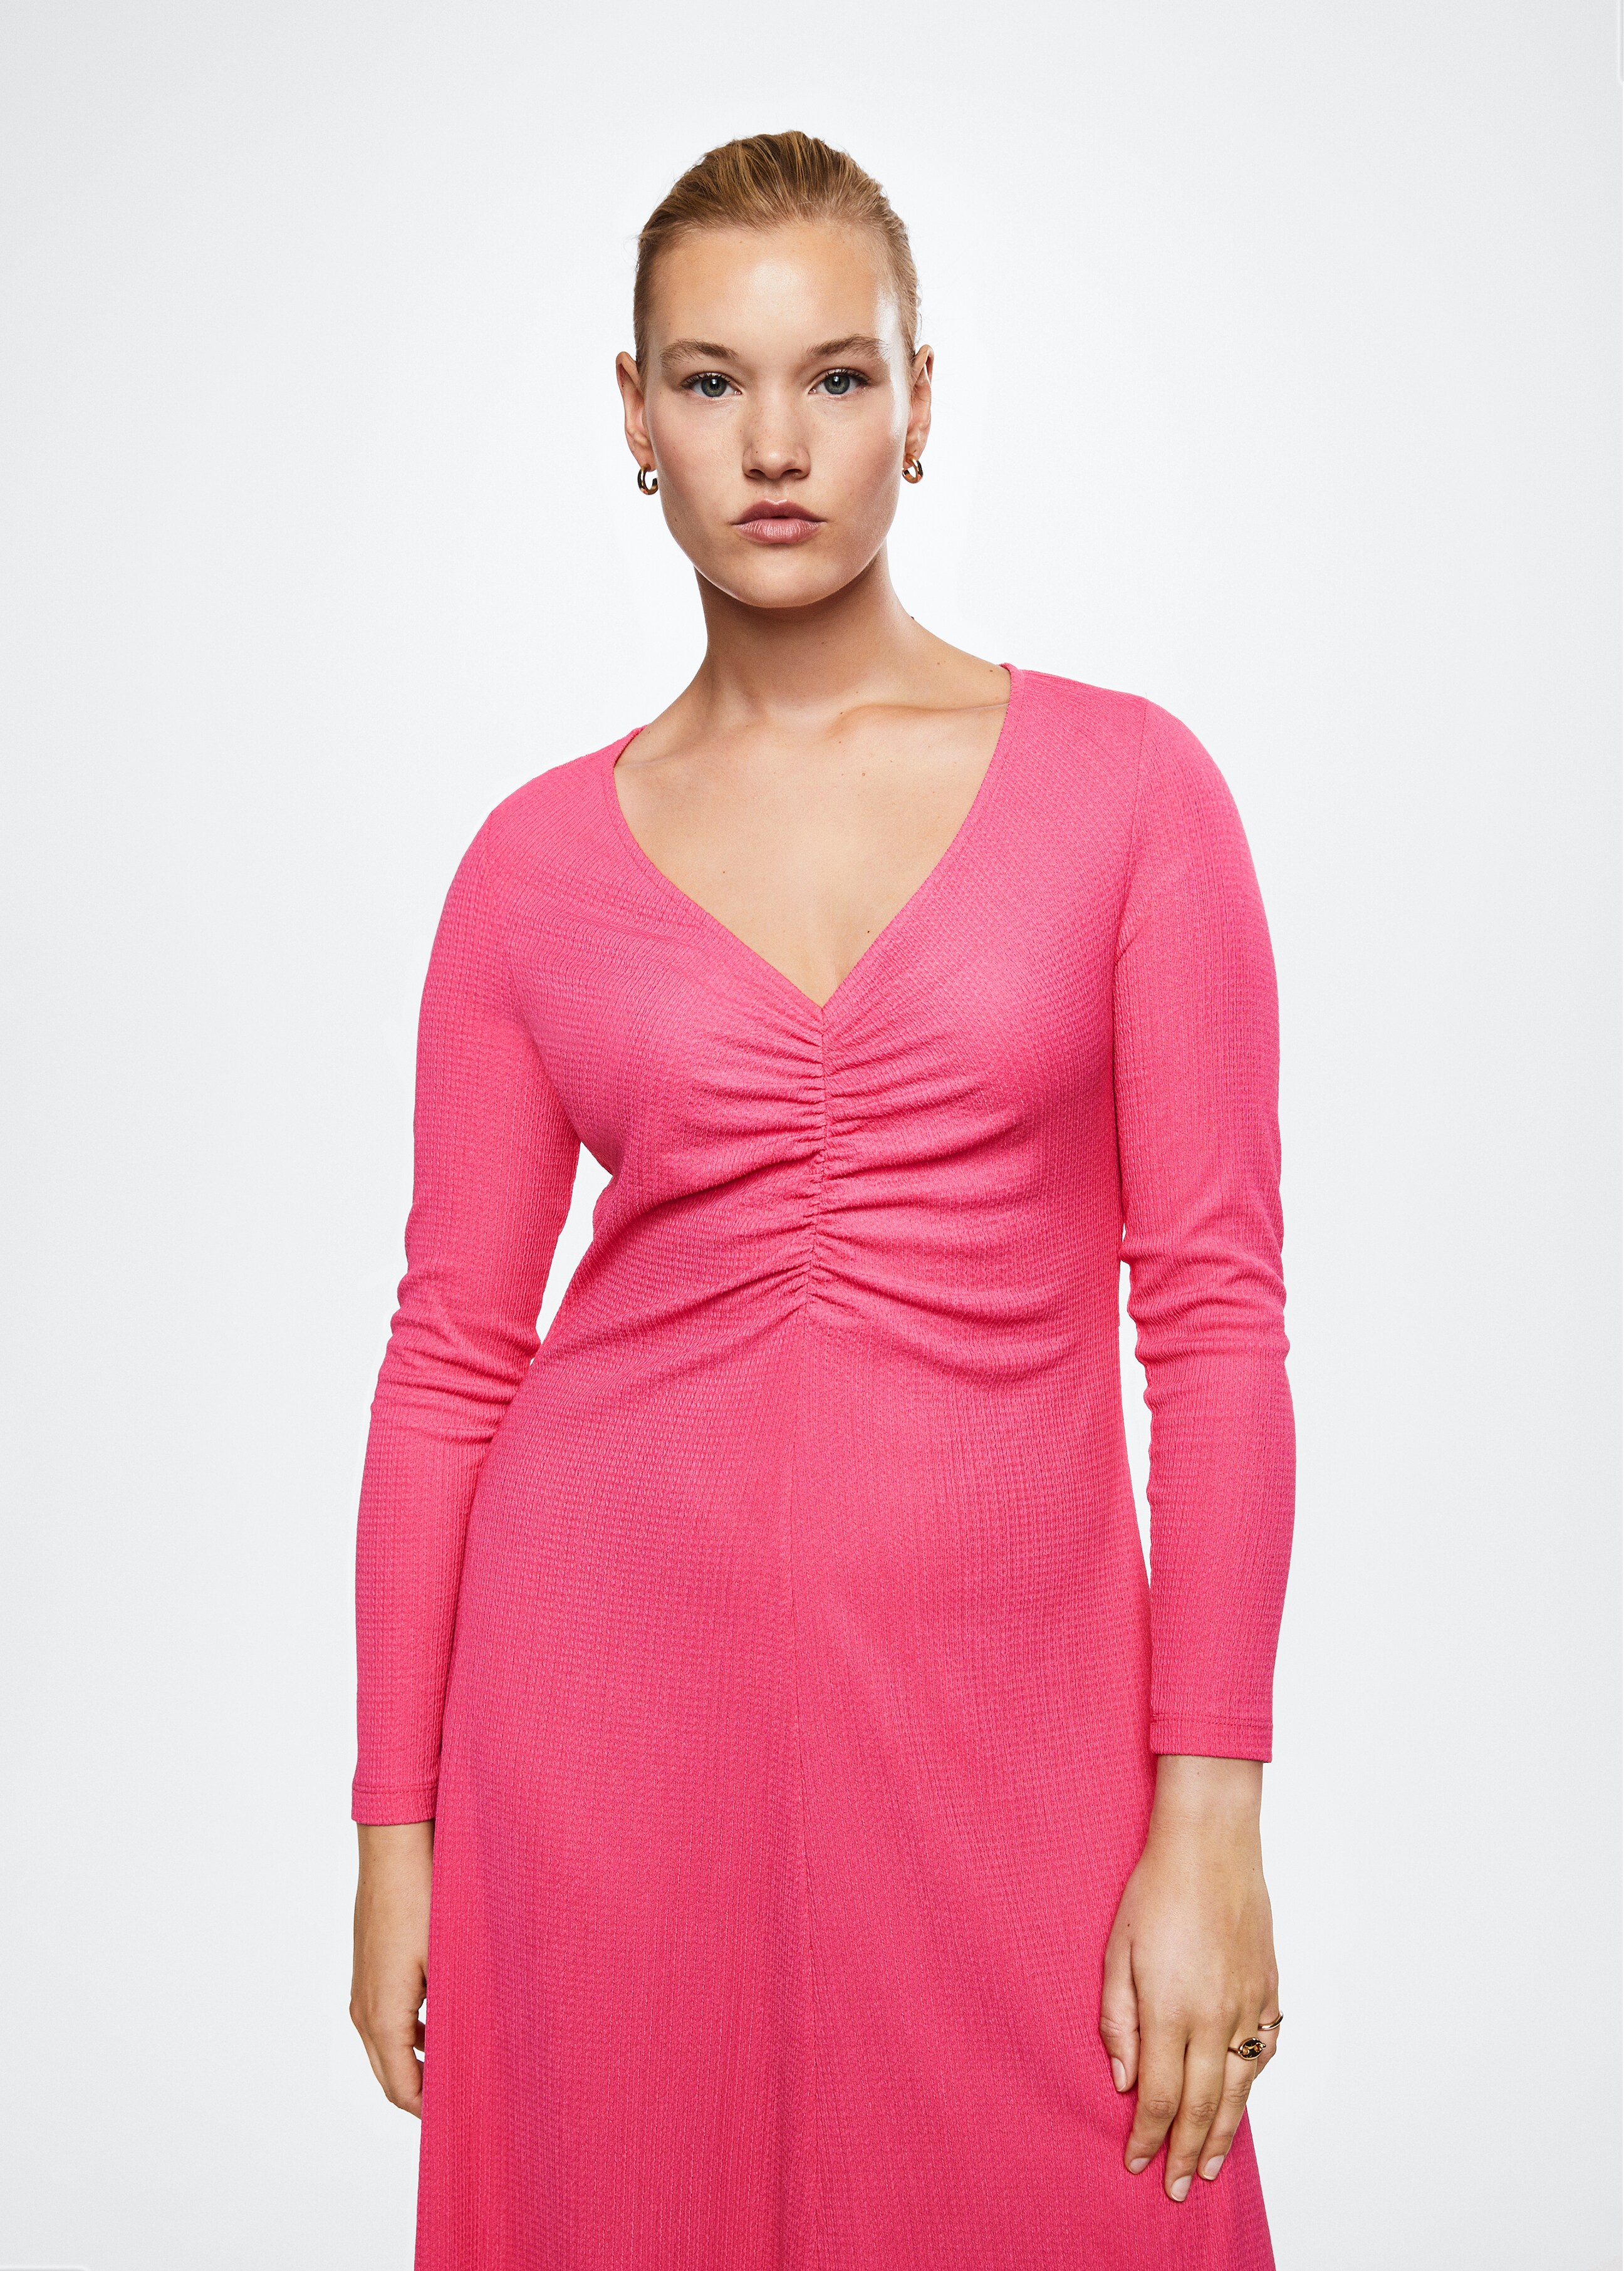 Ruched detail dress - Details of the article 5